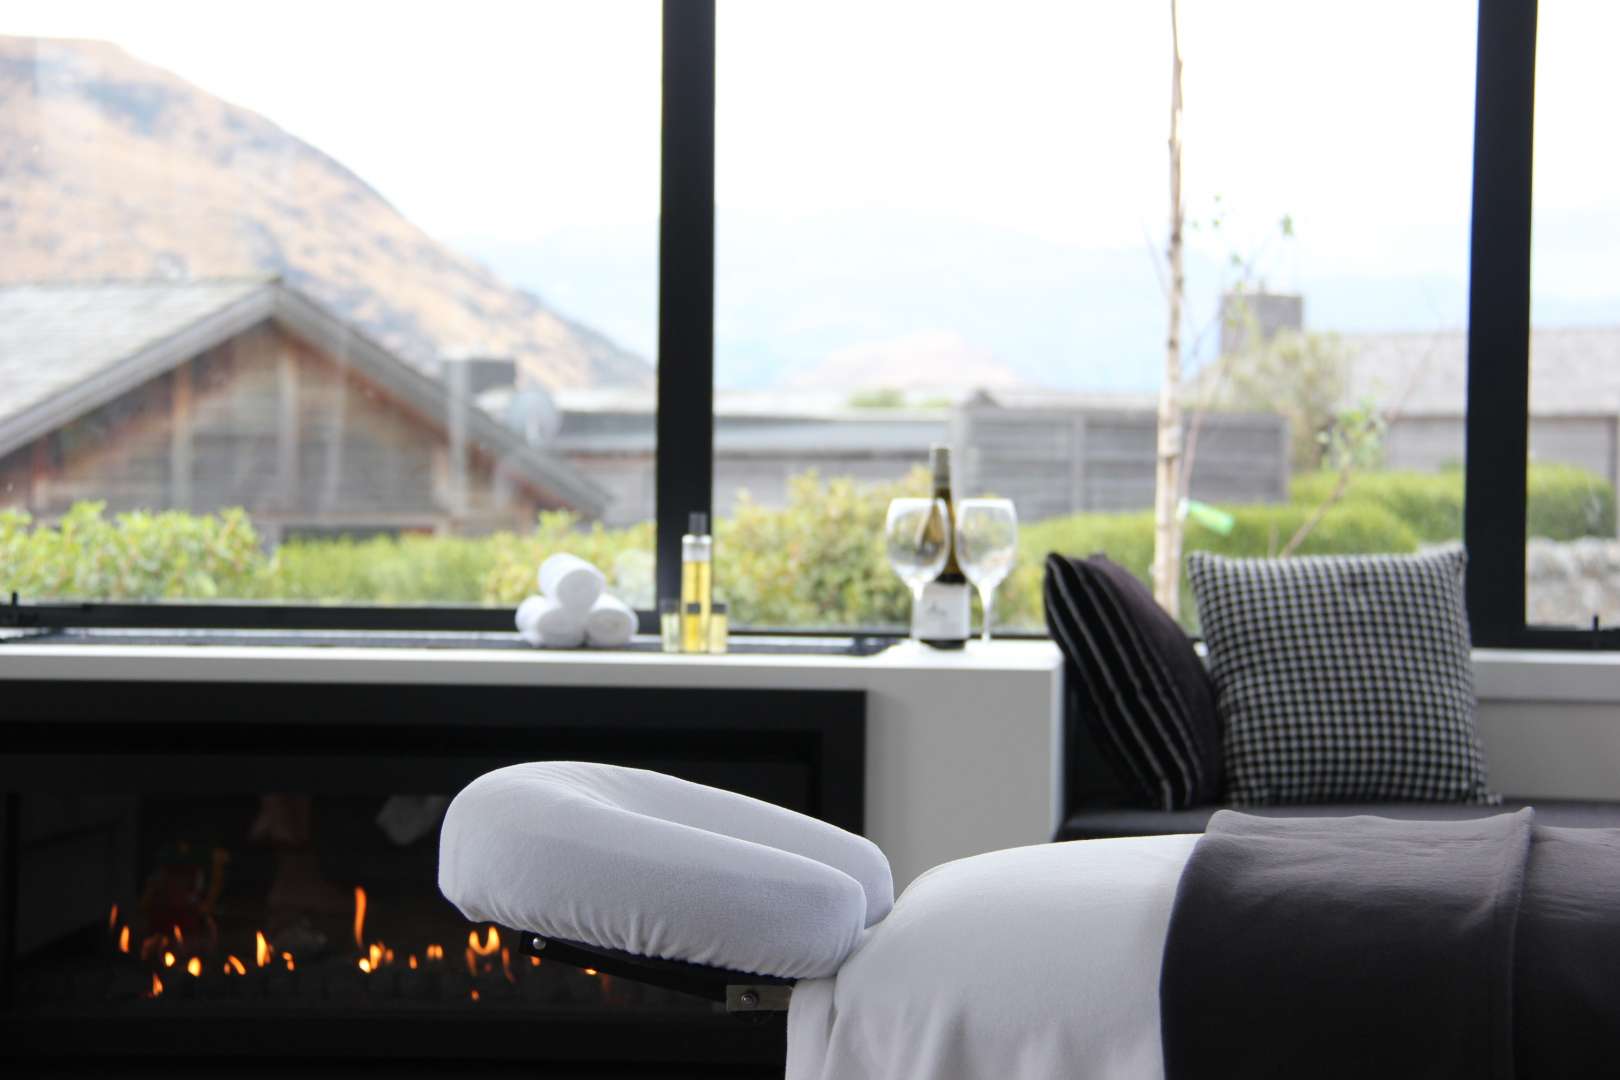 Indulge Mobile Spa delivers the best massage in Queenstown.